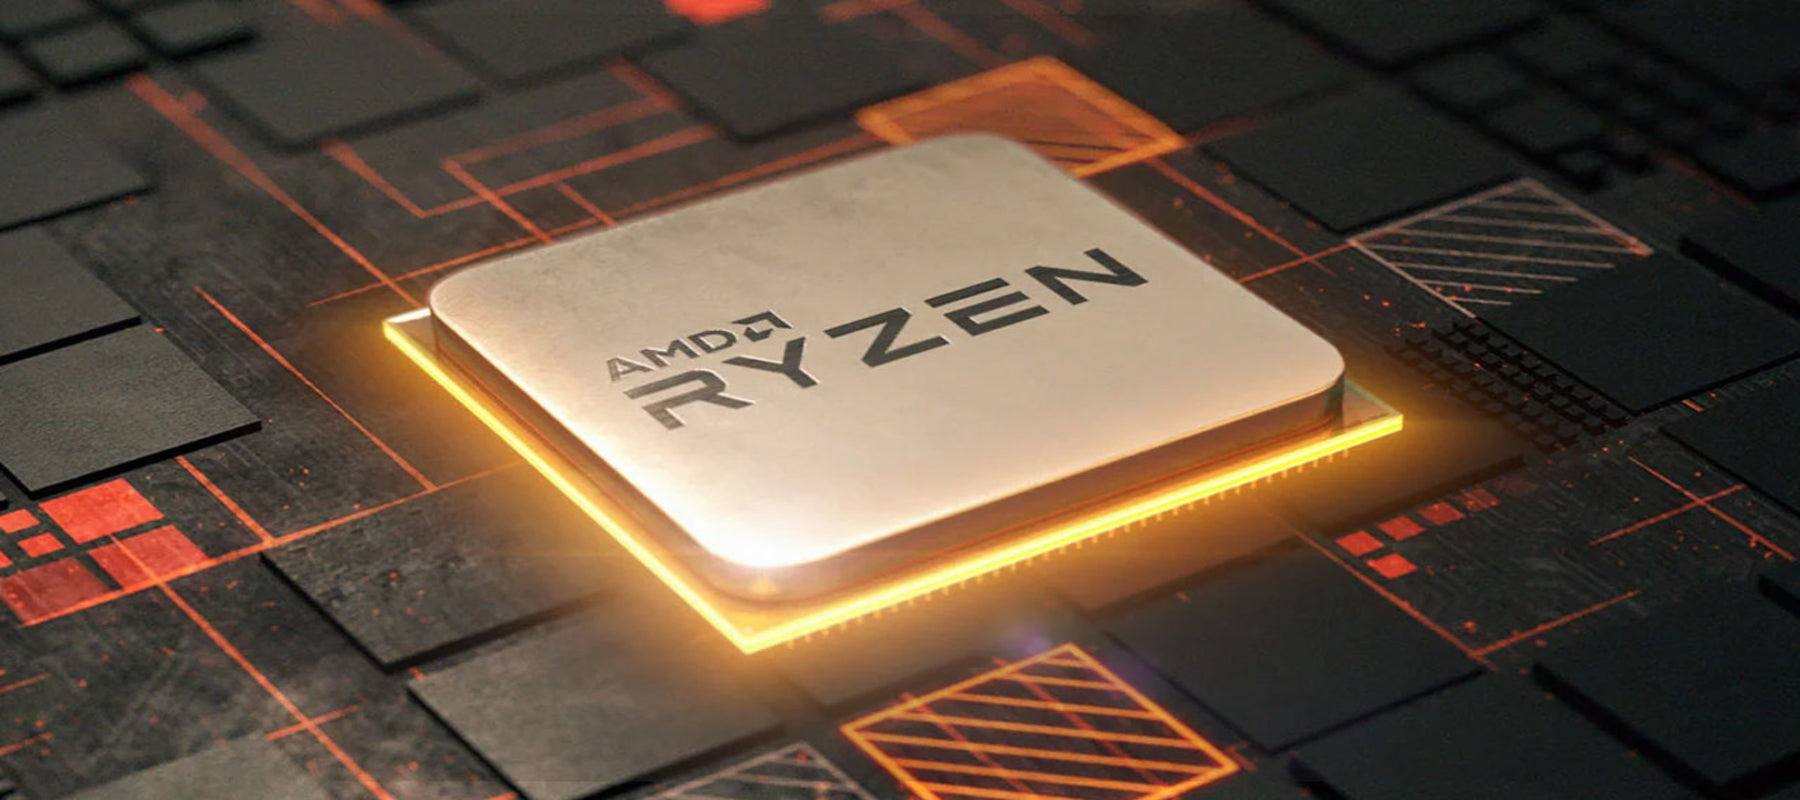 What You Need To Know About Intel's Rival, AMD - Signa